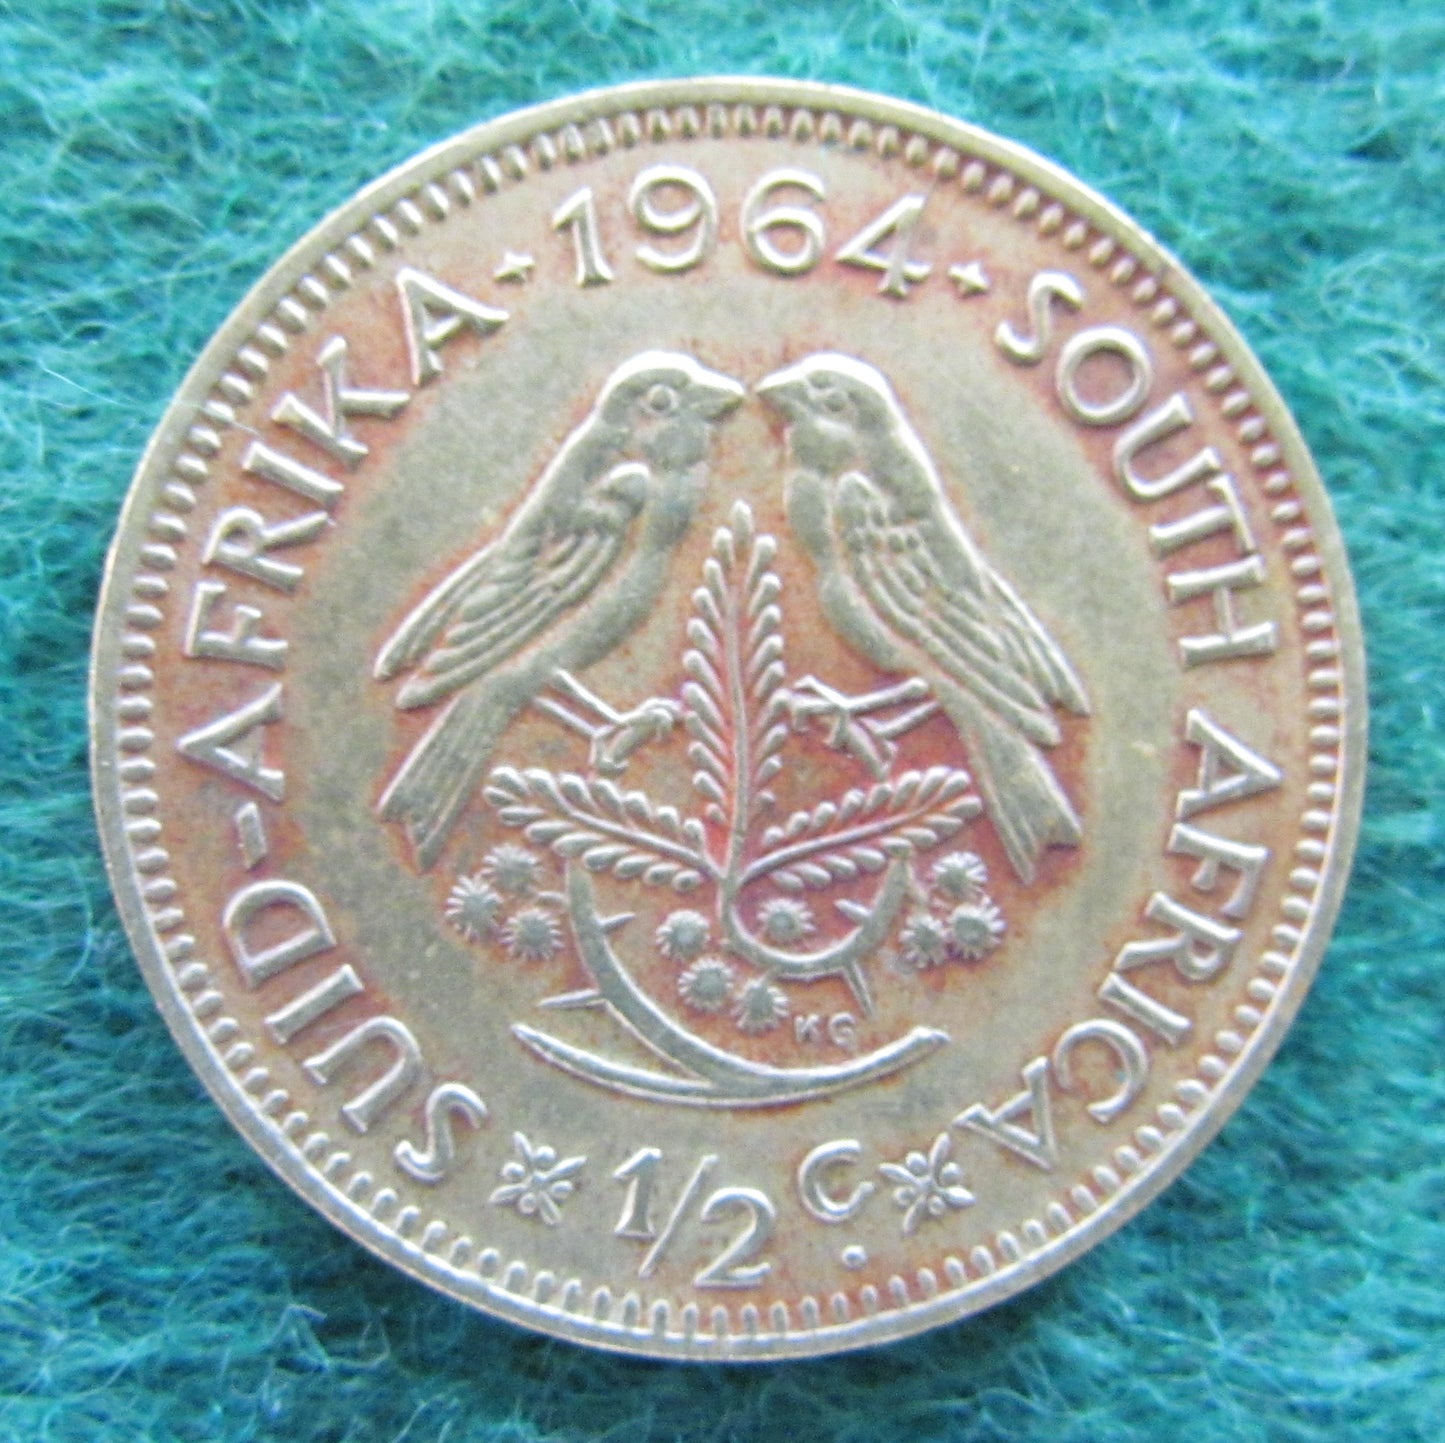 South Africa 1964 1/2 Cent Coin